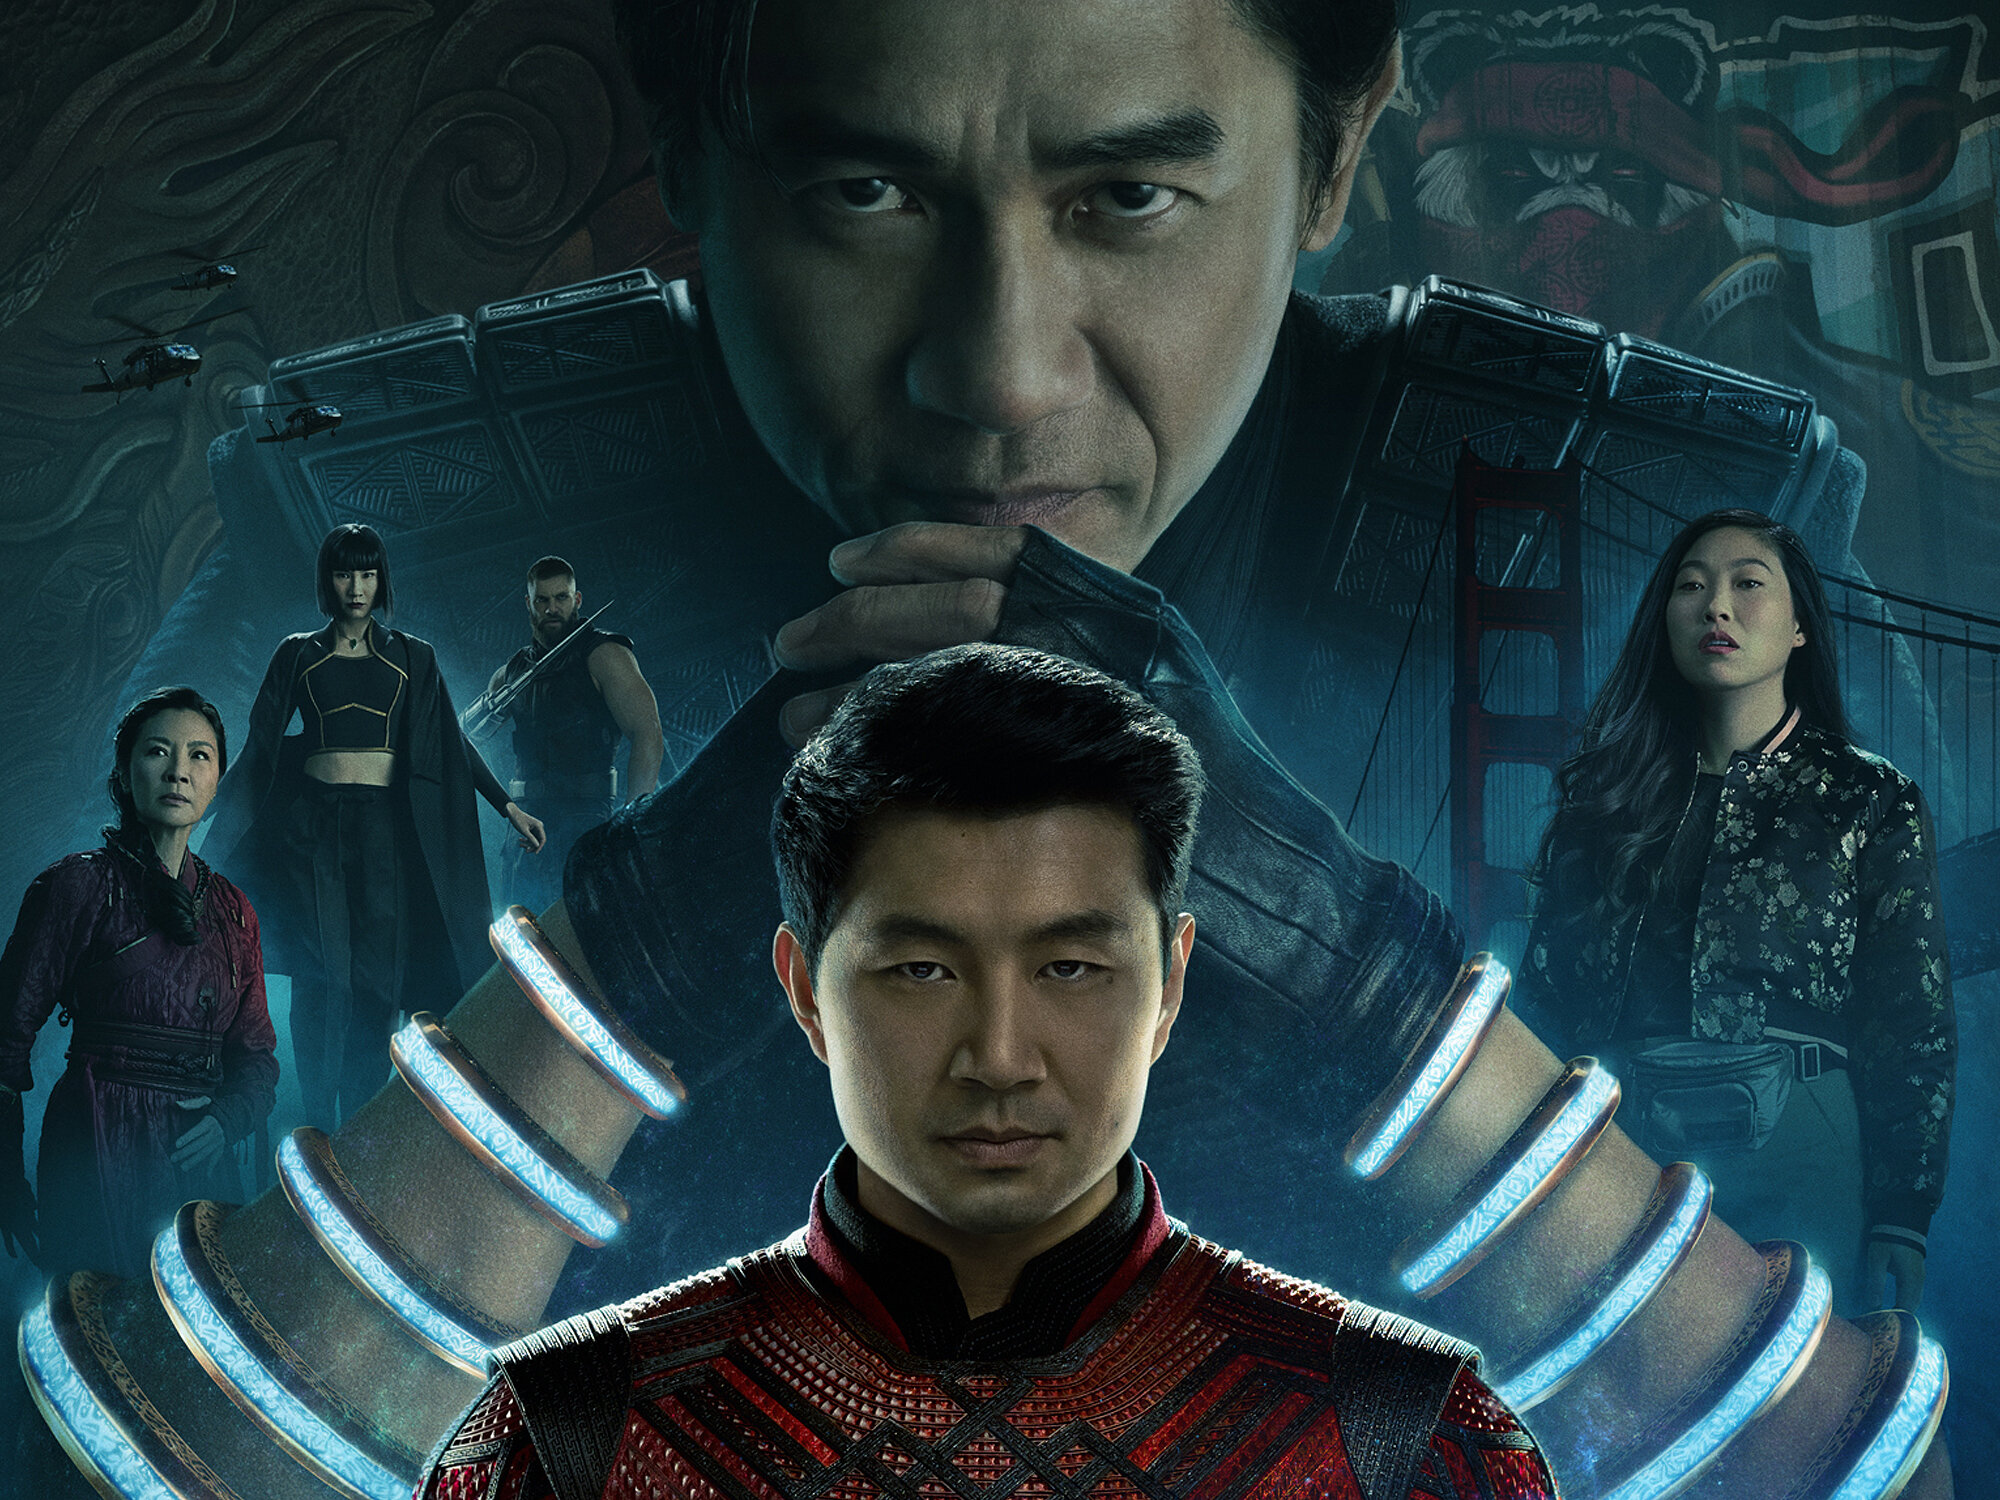 Shang-Chi and the Legends of the Ten Rings IMDb Rating: 7.4